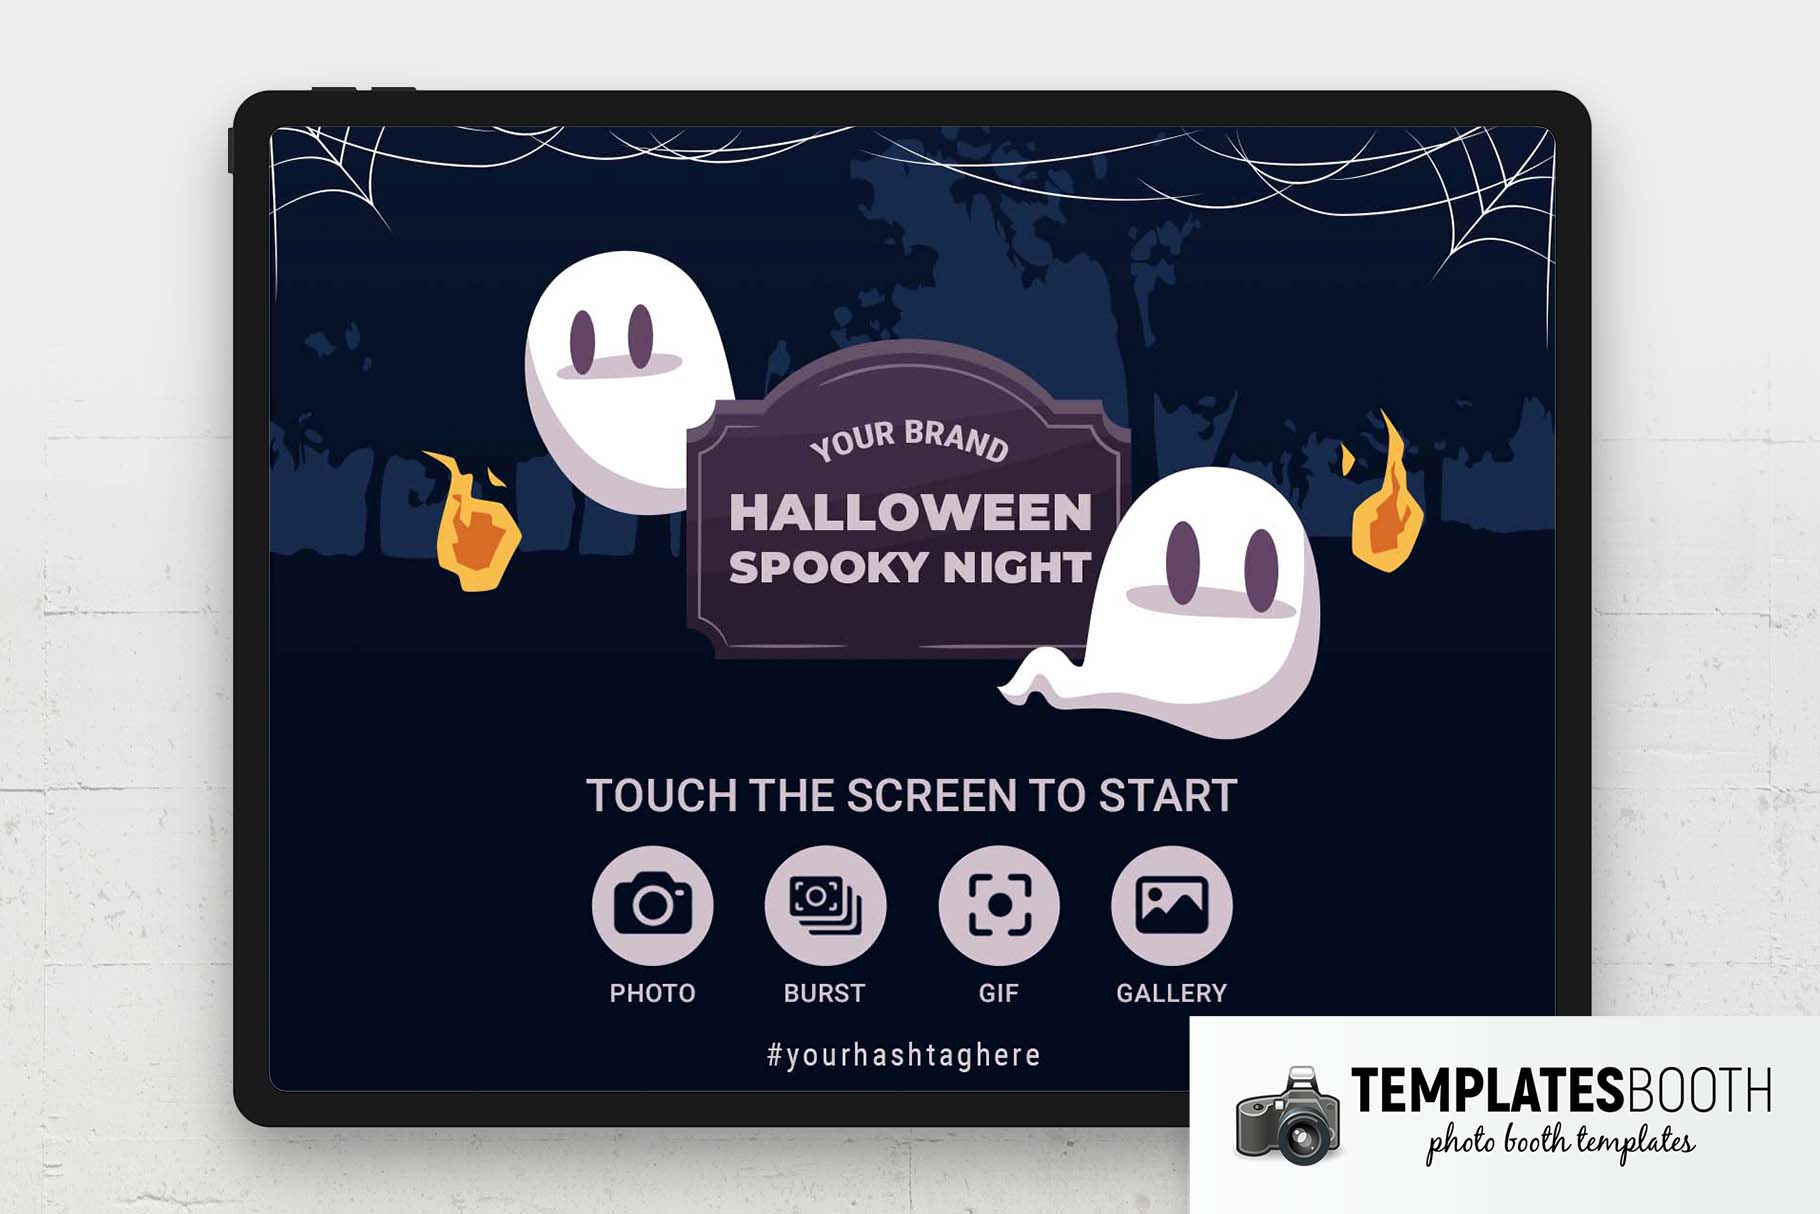 Halloween Spooky Night Photo Booth Welcome Screen